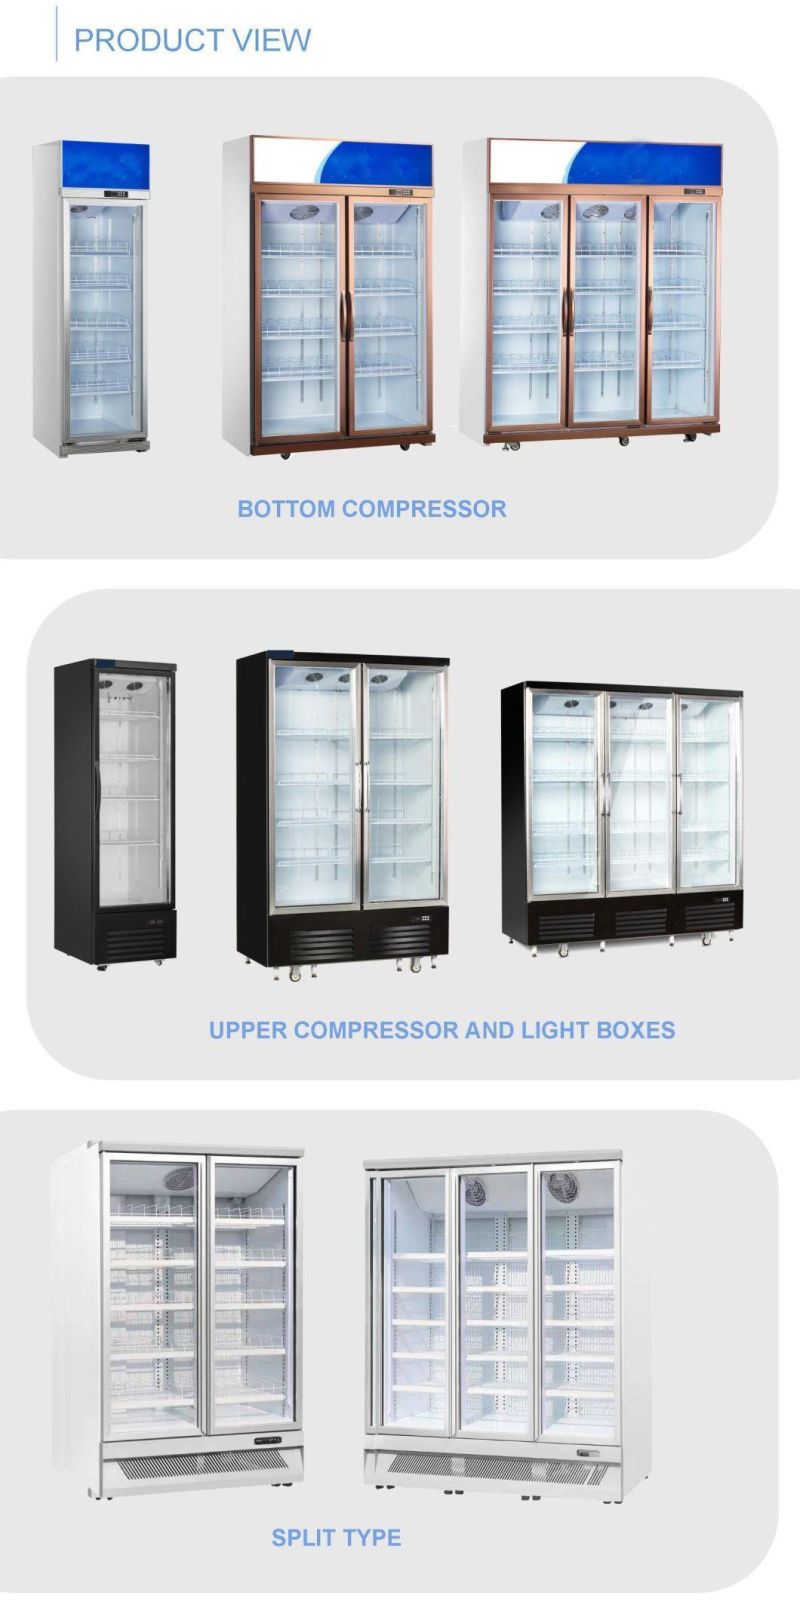 OEM The Best Single Door Commercial Glass Display Showcase Drink Coolers Upright Fridge for Sale